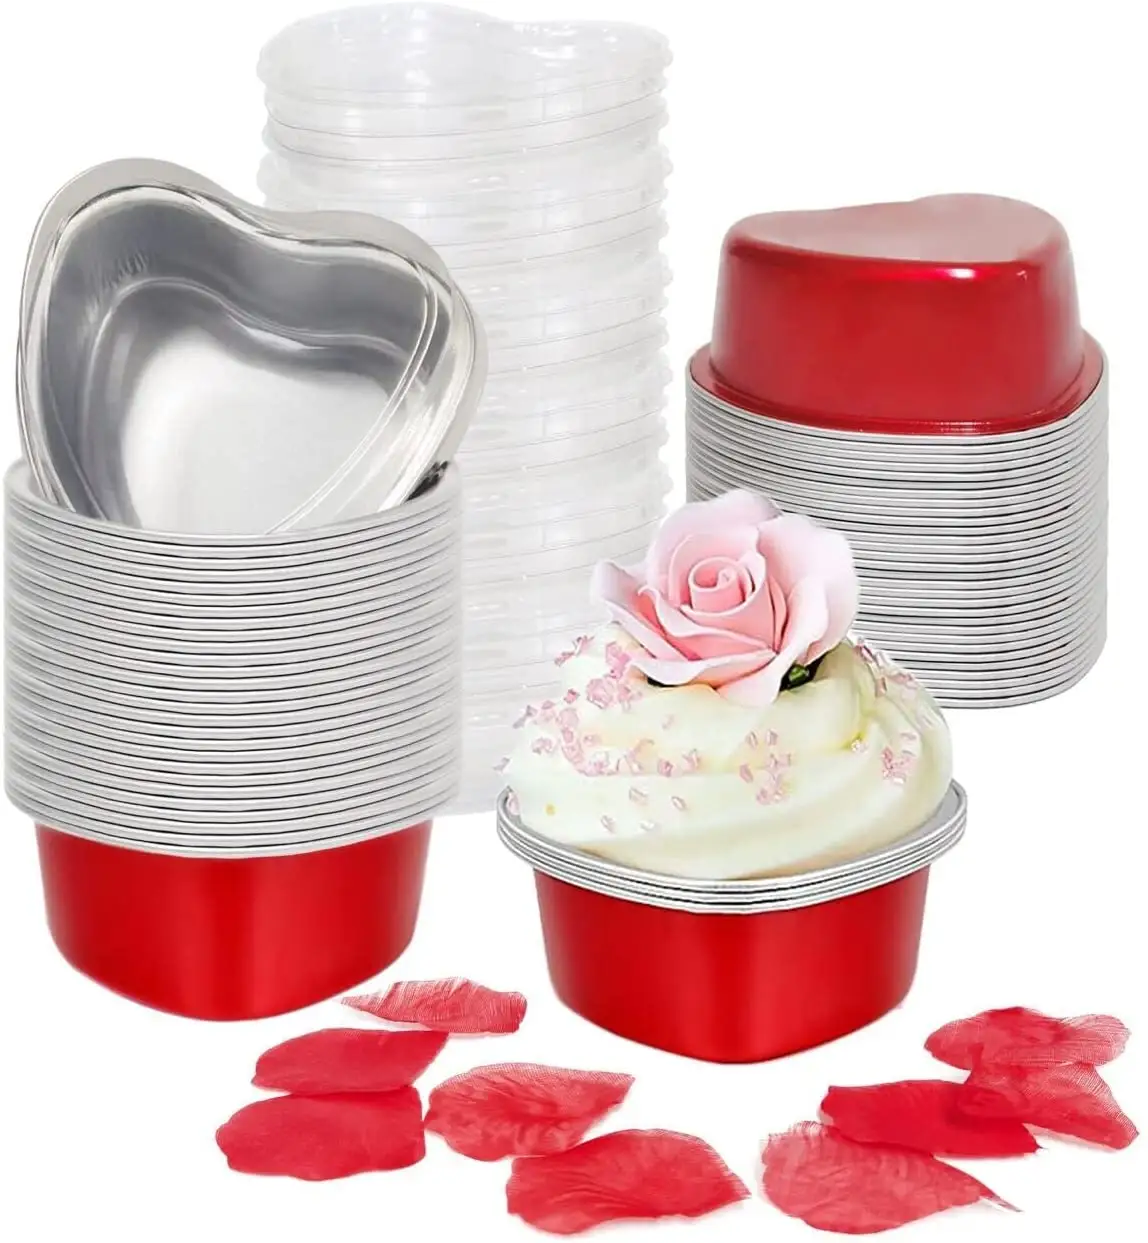 Heart Cake Pans for Baking with Red Petals 50 Sets Aluminum Cupcake Cups with Lids Disposable Mini Foil Pans for Valentine's Day